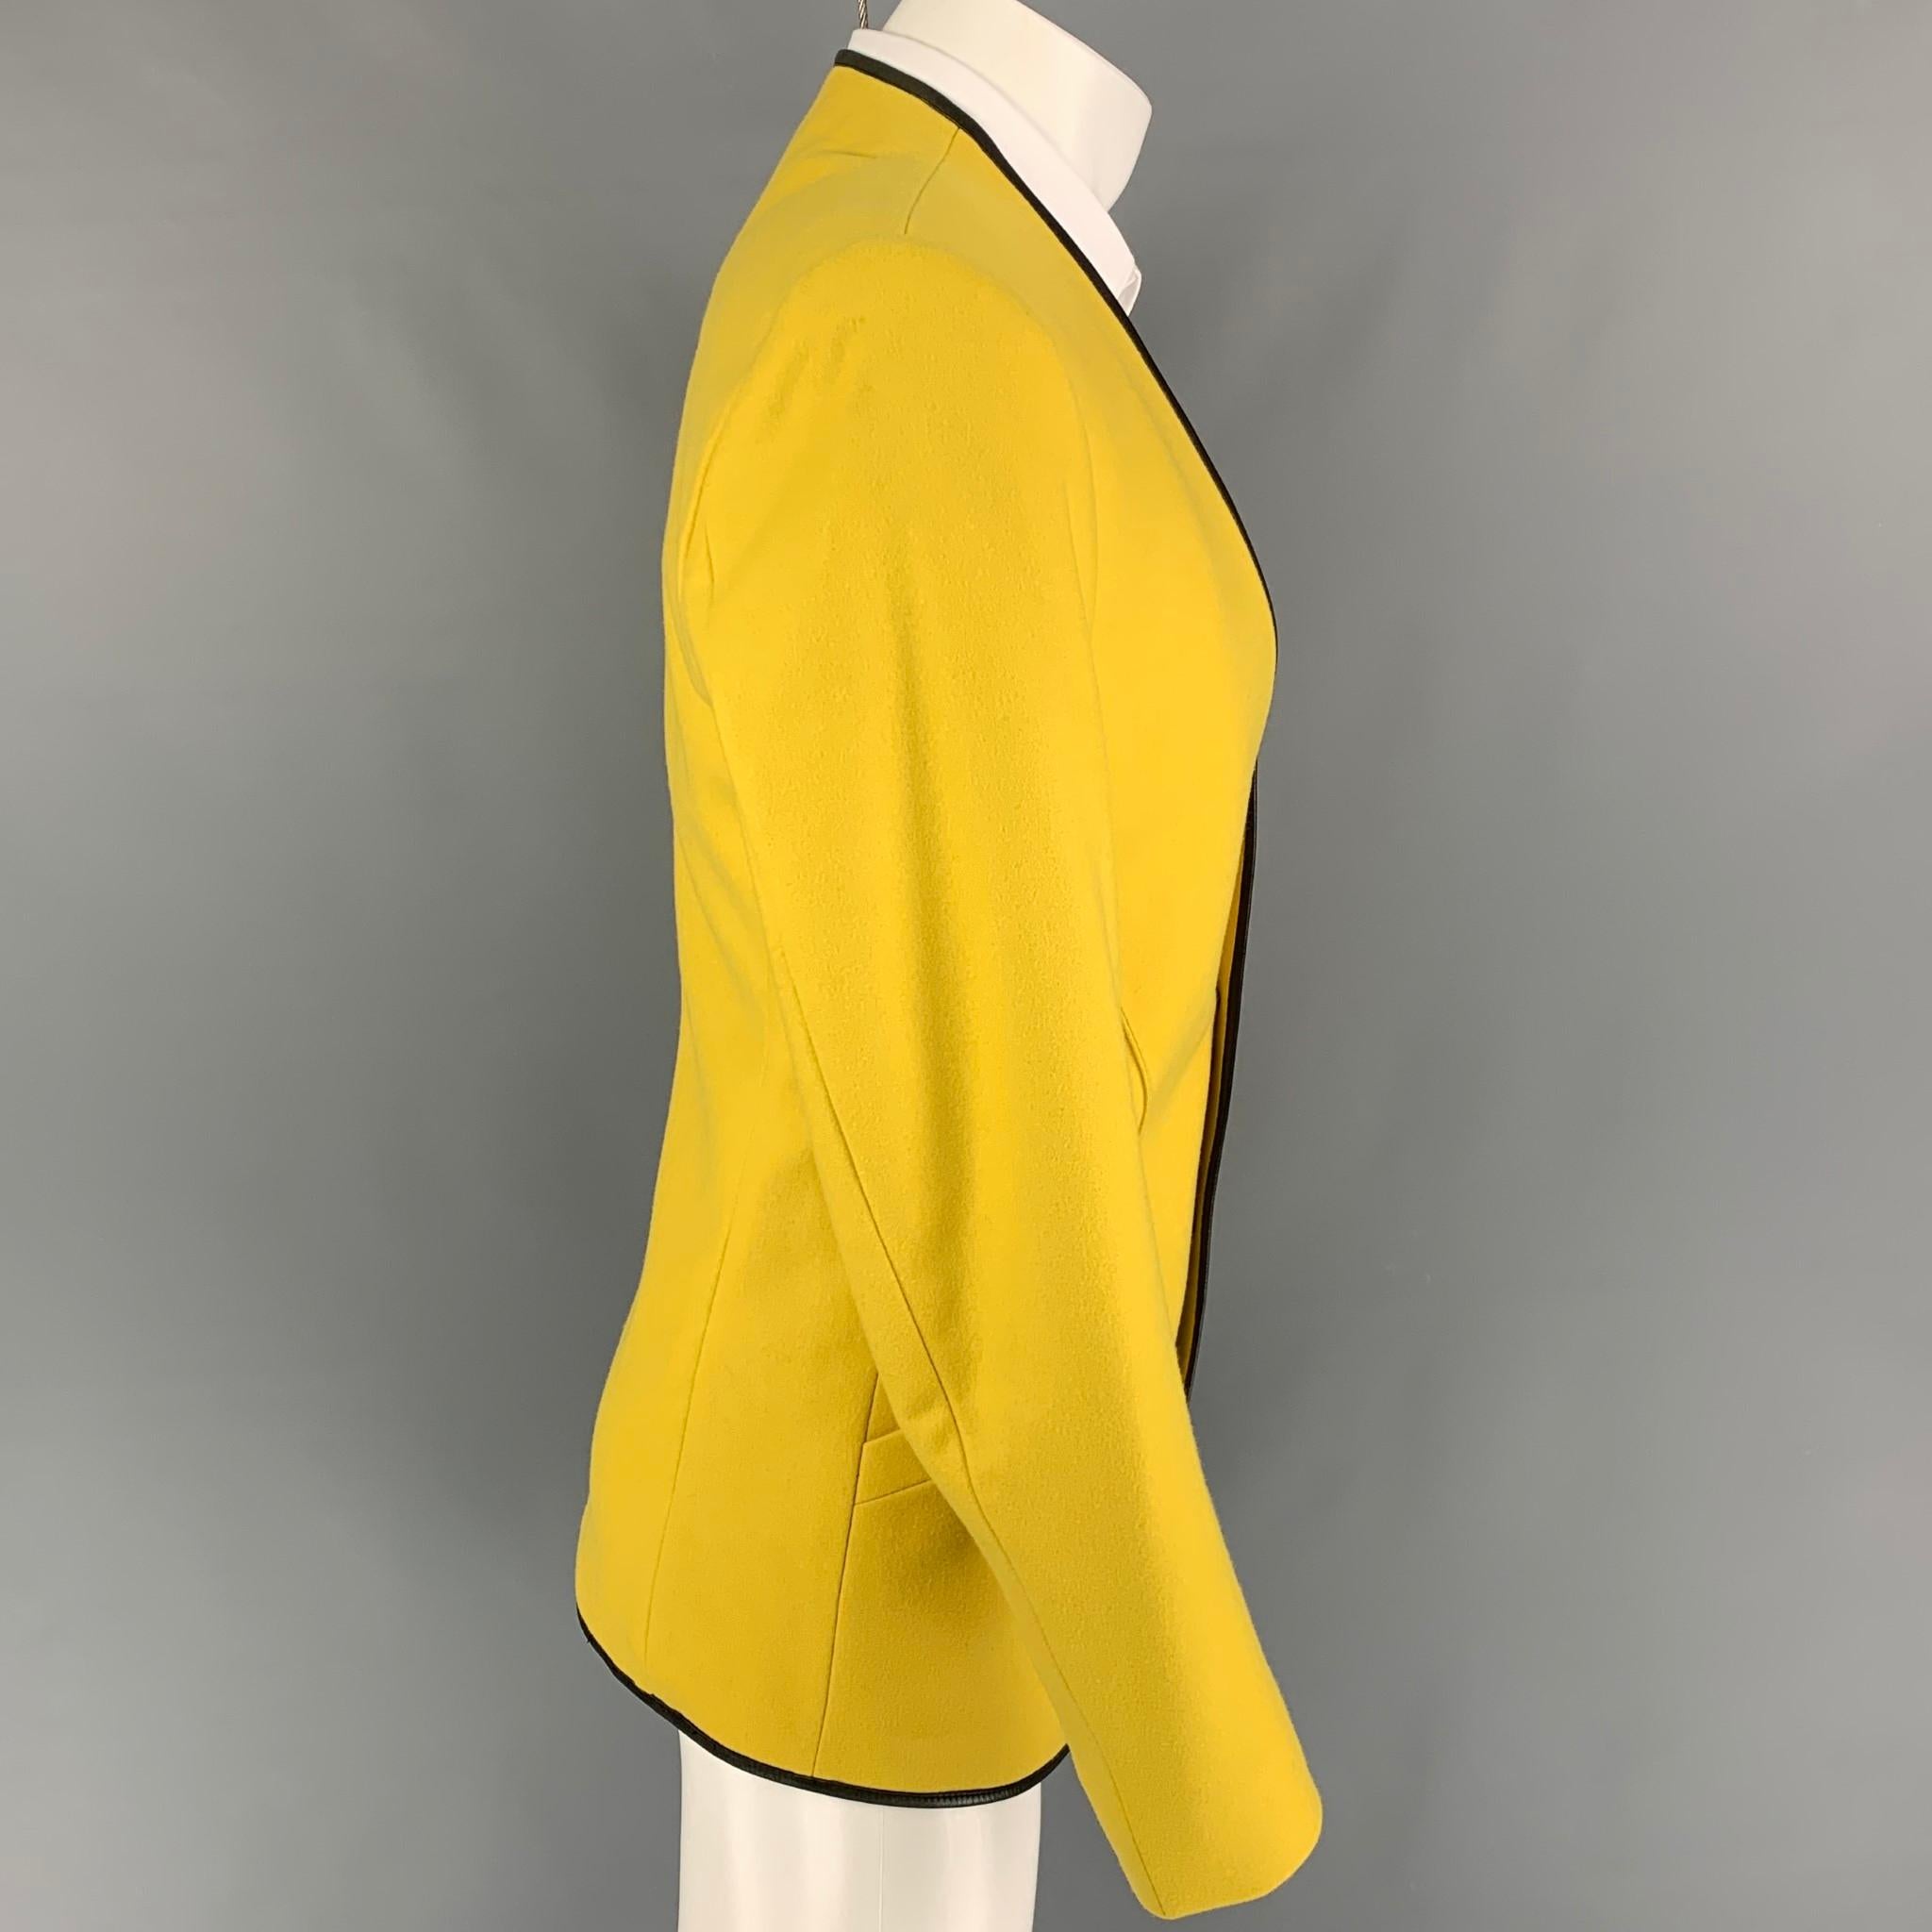 Vintage THIERRY MUGLER jacket comes in a yellow wool with a full liner featuring a collarless style, leather trim, silver tone stat buttons, front pockets, and a double snap button closure. Made in France. 

Very Good Pre-Owned Condition.
Marked: